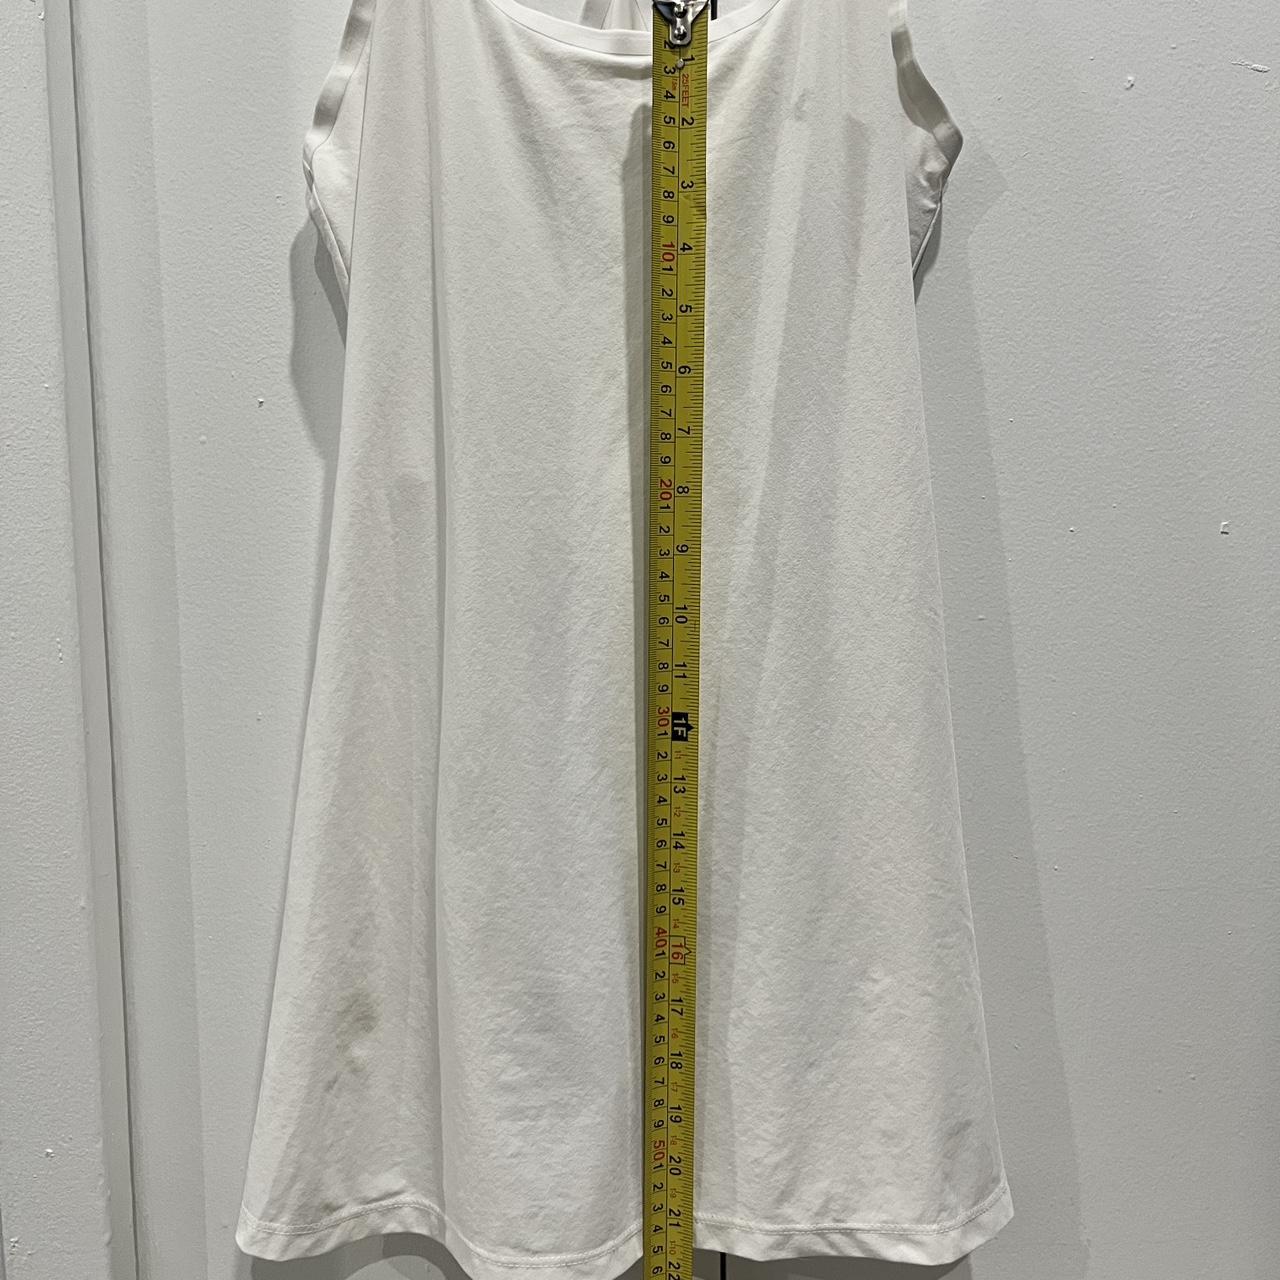 The exercise dress from outdoor voices in white. - Depop